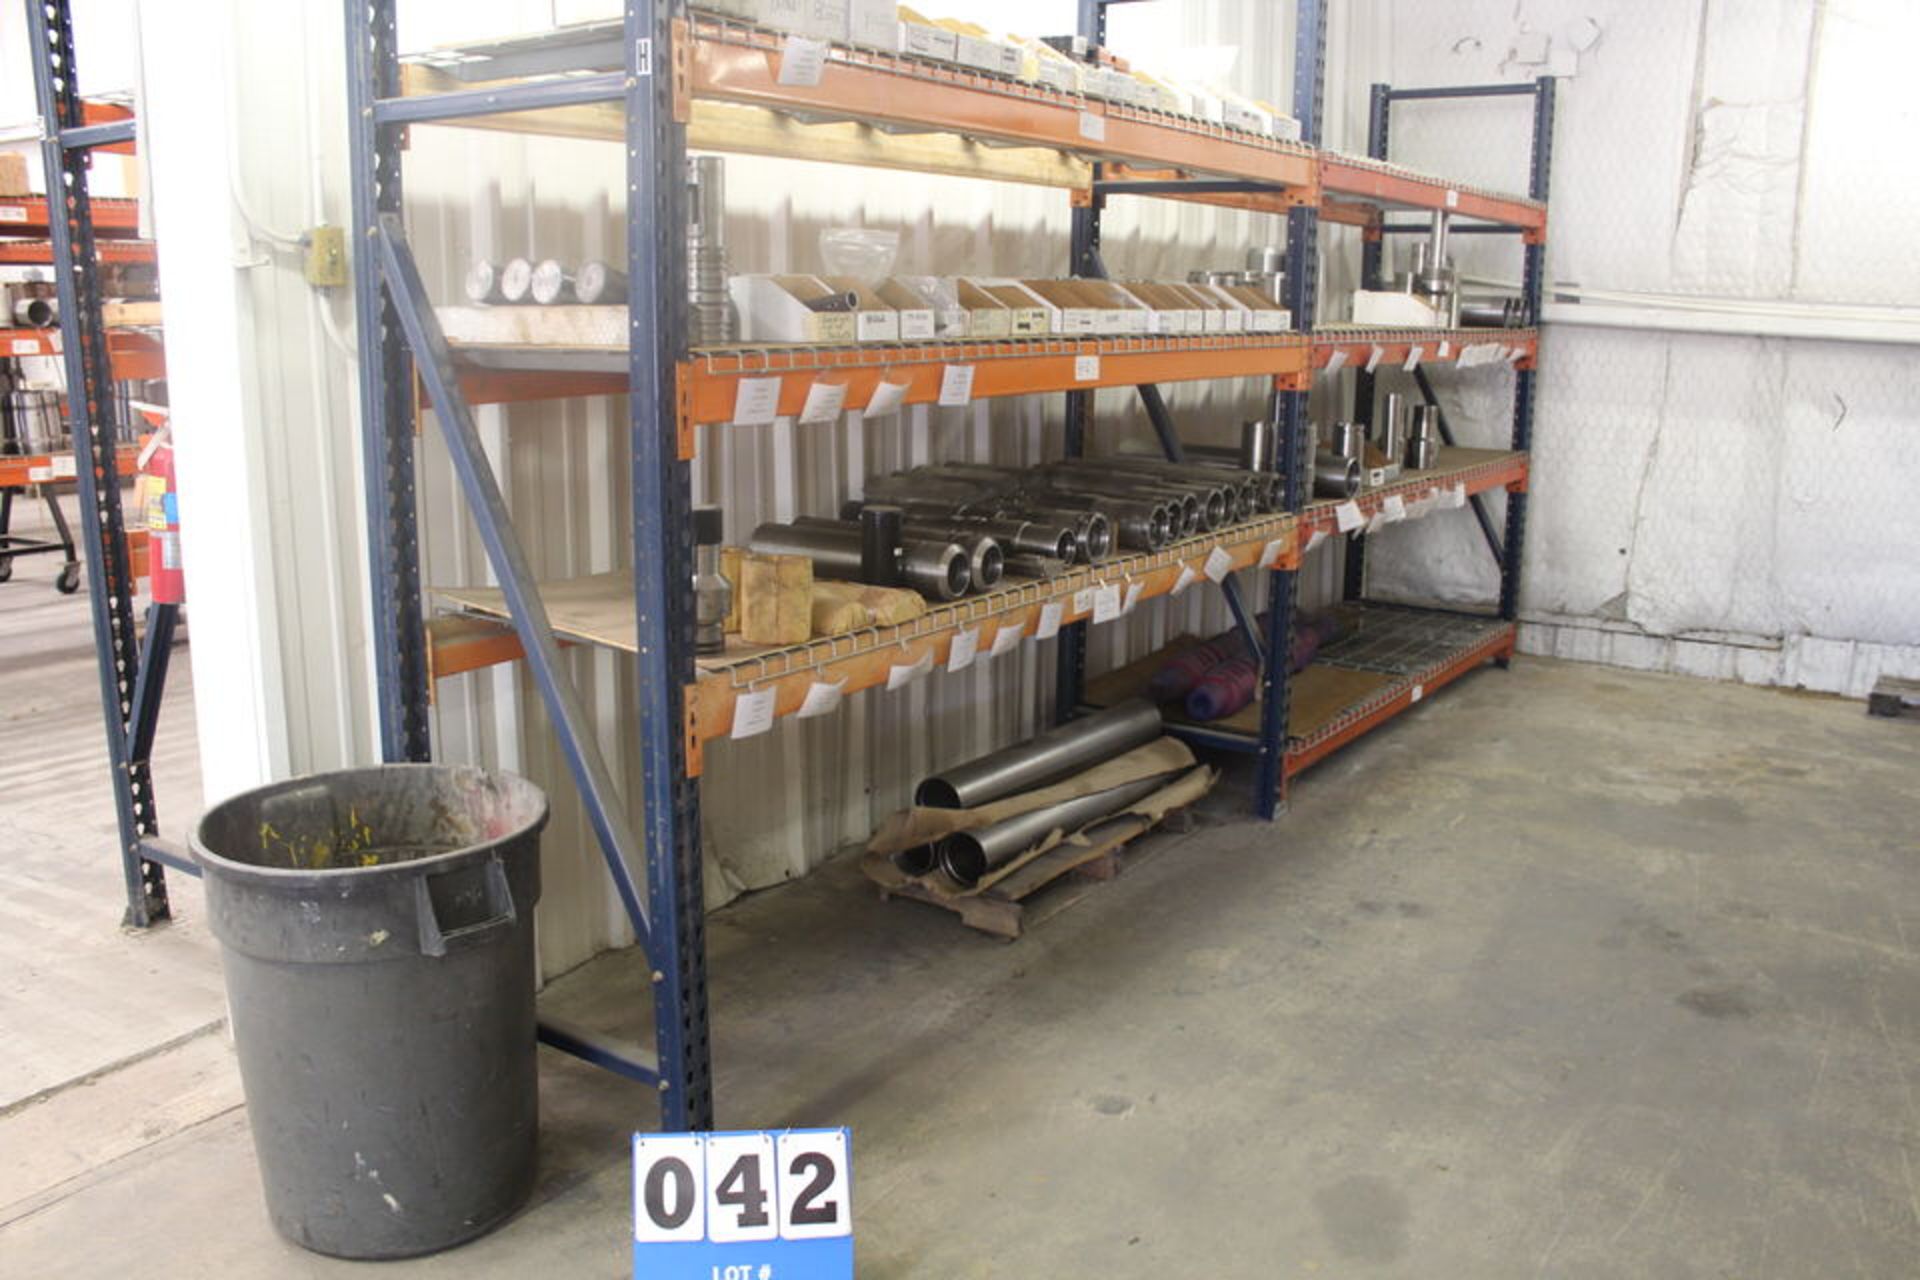 ALL INVENTORY THROUGHOUT BLDNG 'S ON PALLET RACKS *********** - Image 5 of 12